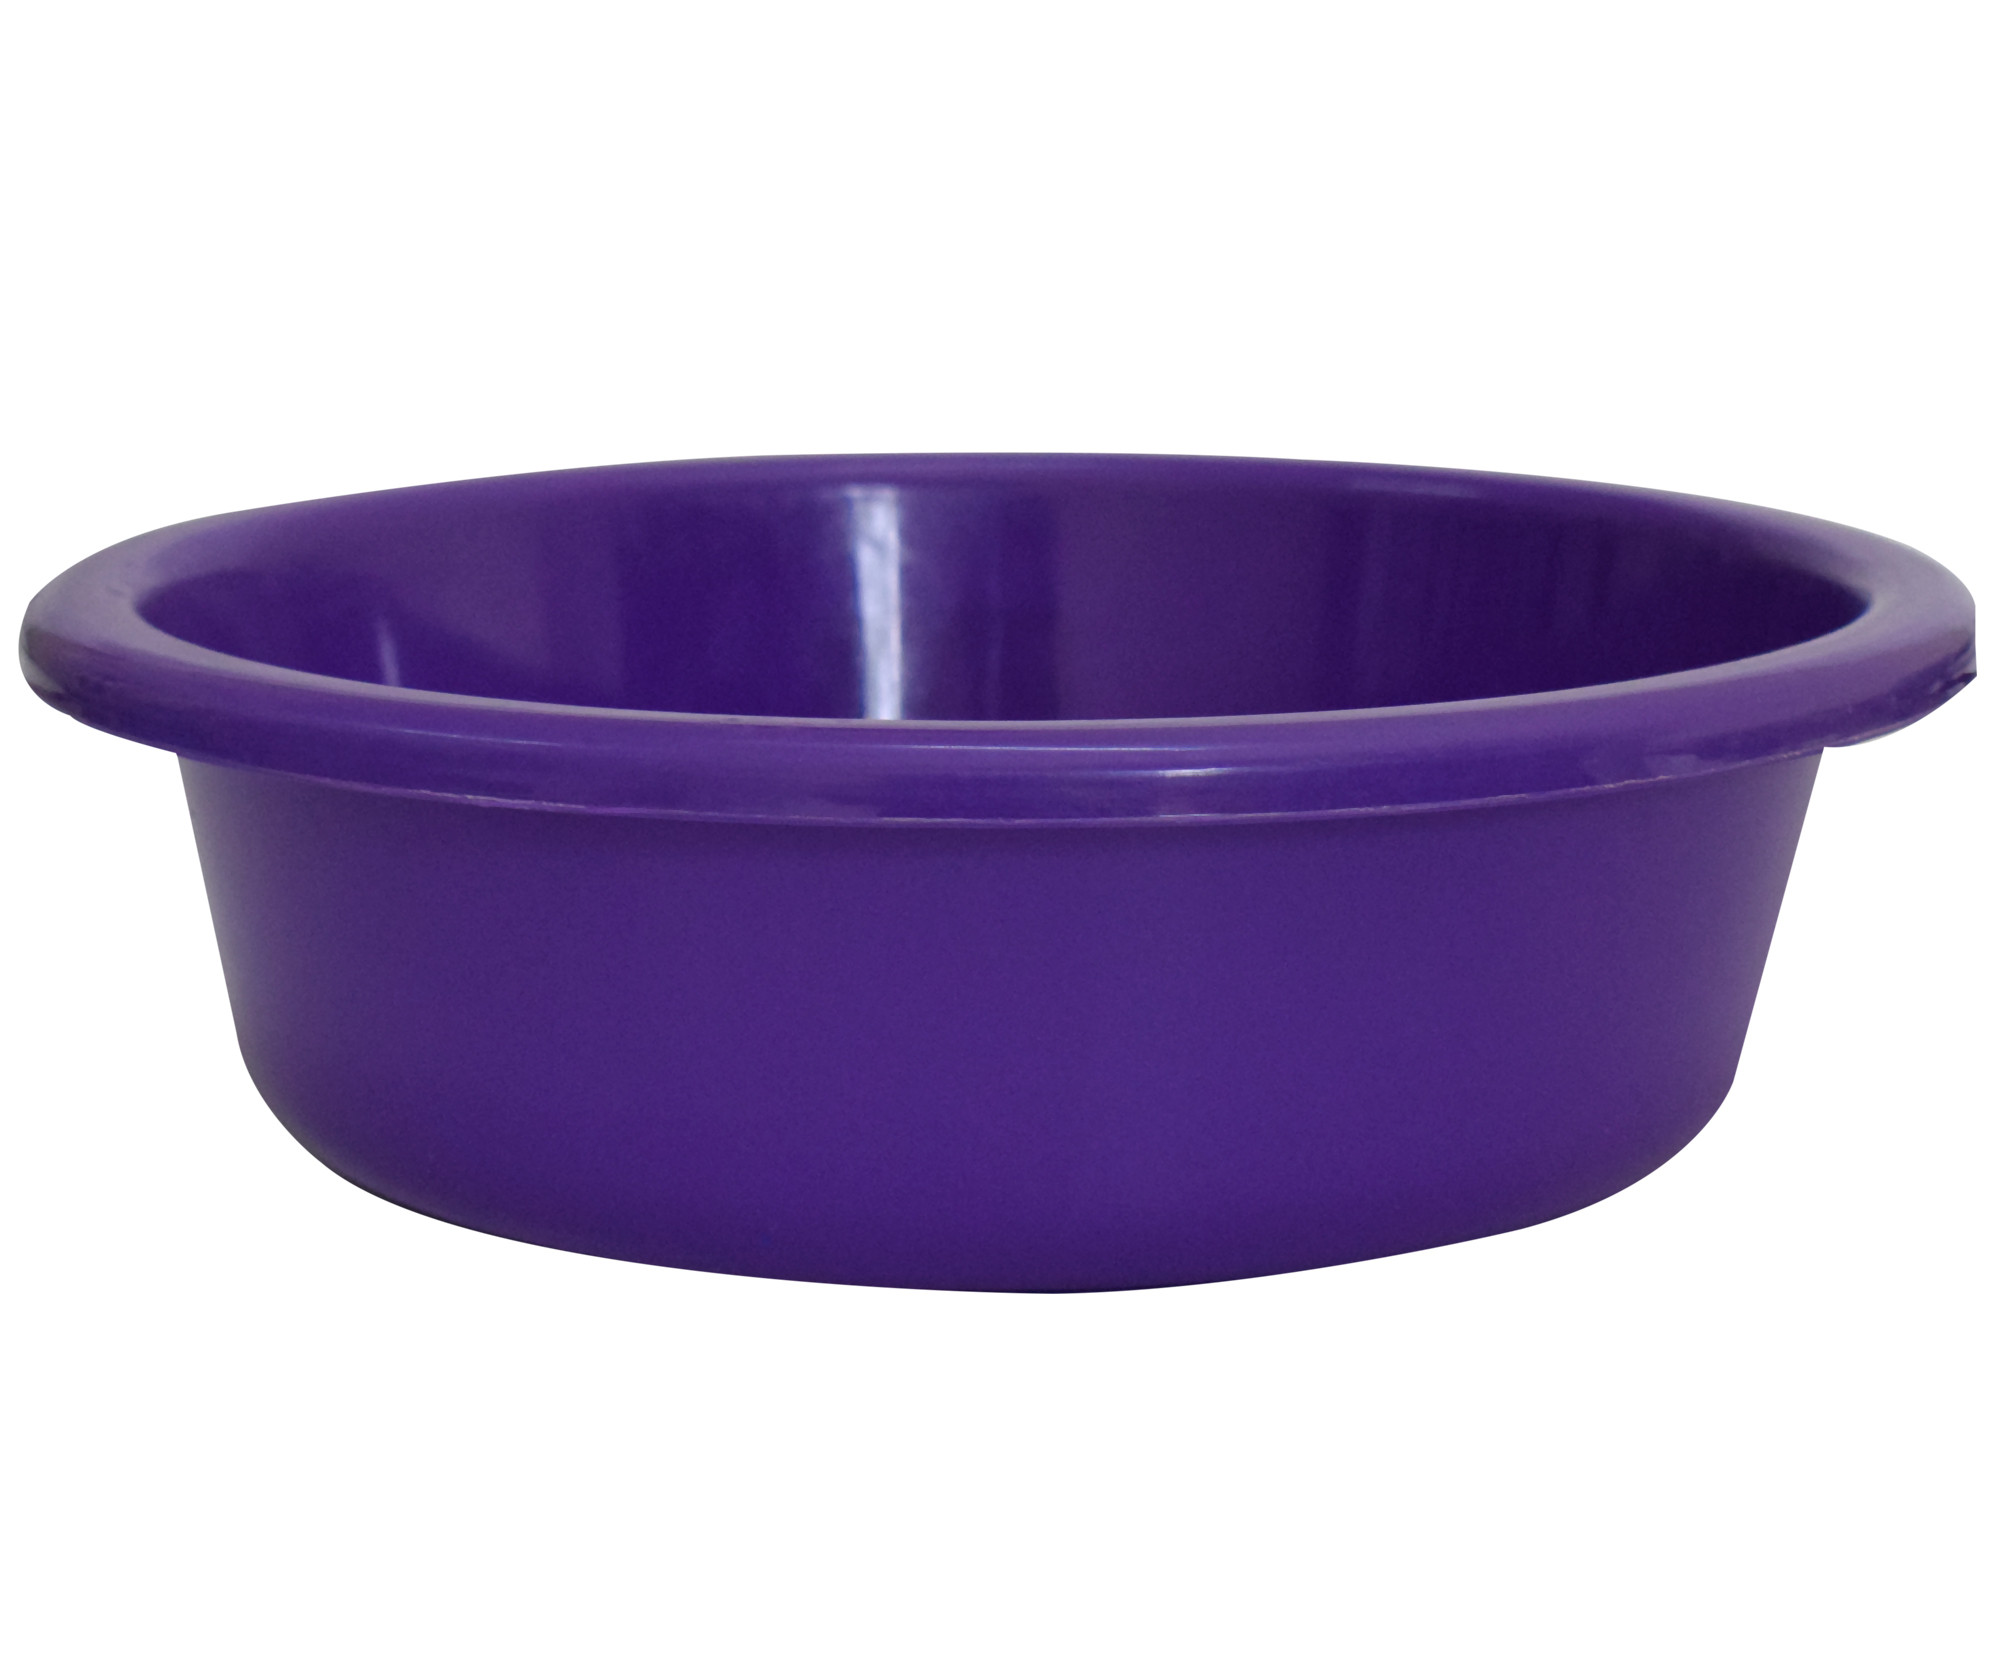 Kuber Industries Multiuses Unbreakable Plastic Knead Dough Basket/Basin Bowl For Home & Kitchen 6 Ltr- Pack of 2 (Purple & Blue)